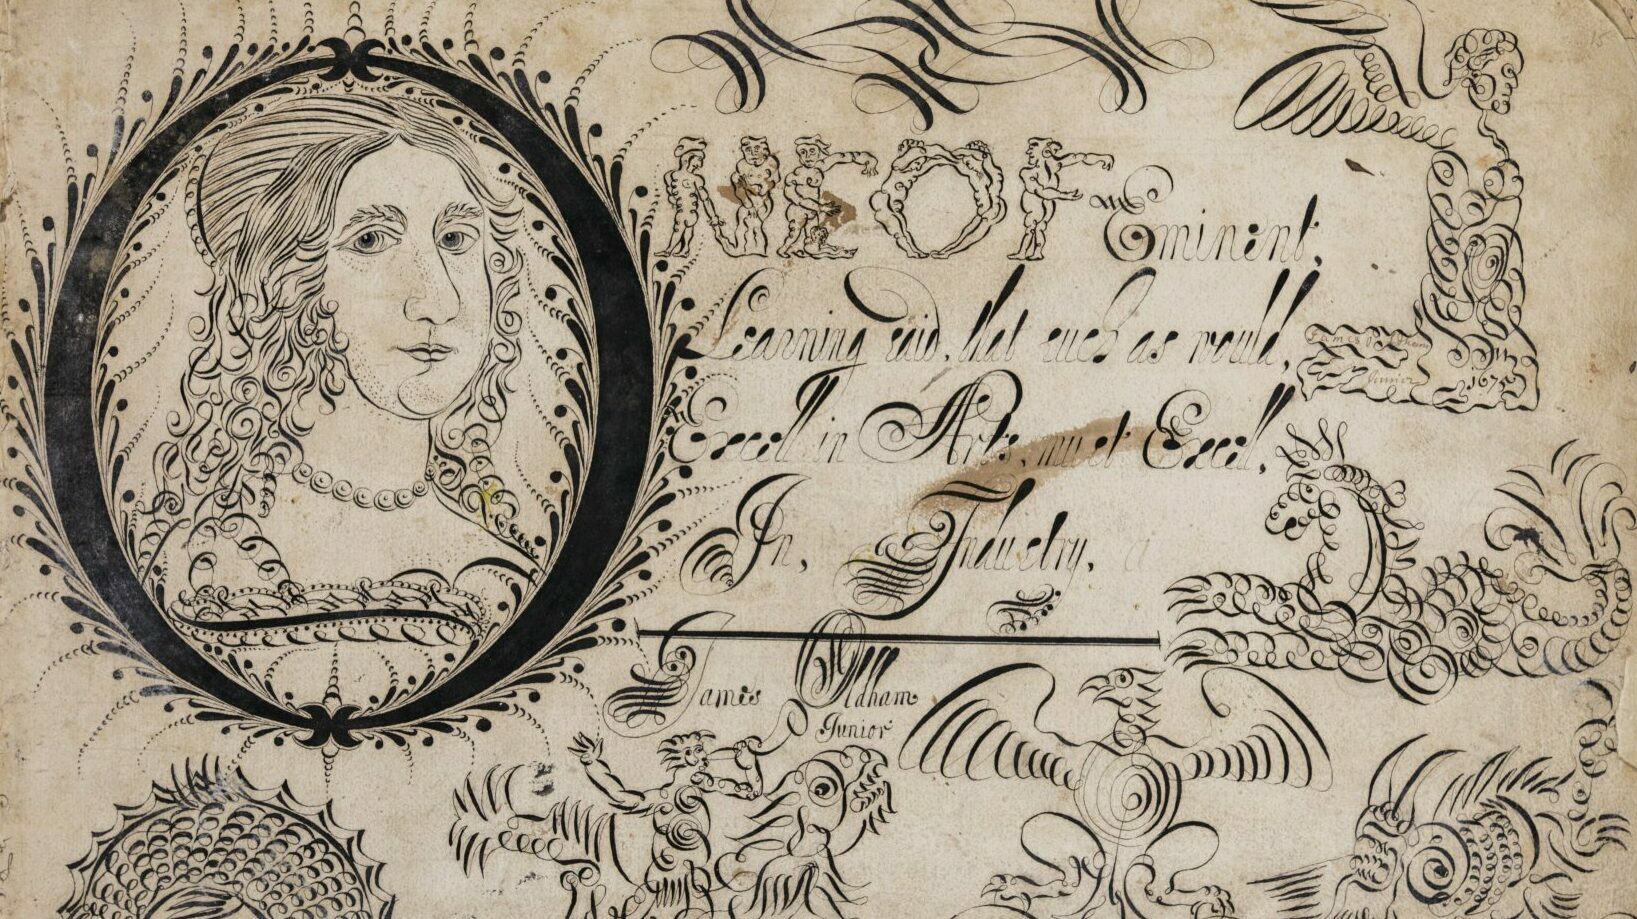 Inside a large letter "O" is a portrait of a woman. Also on the page are hand-drawn doodles of fish, angels, and cherubs.